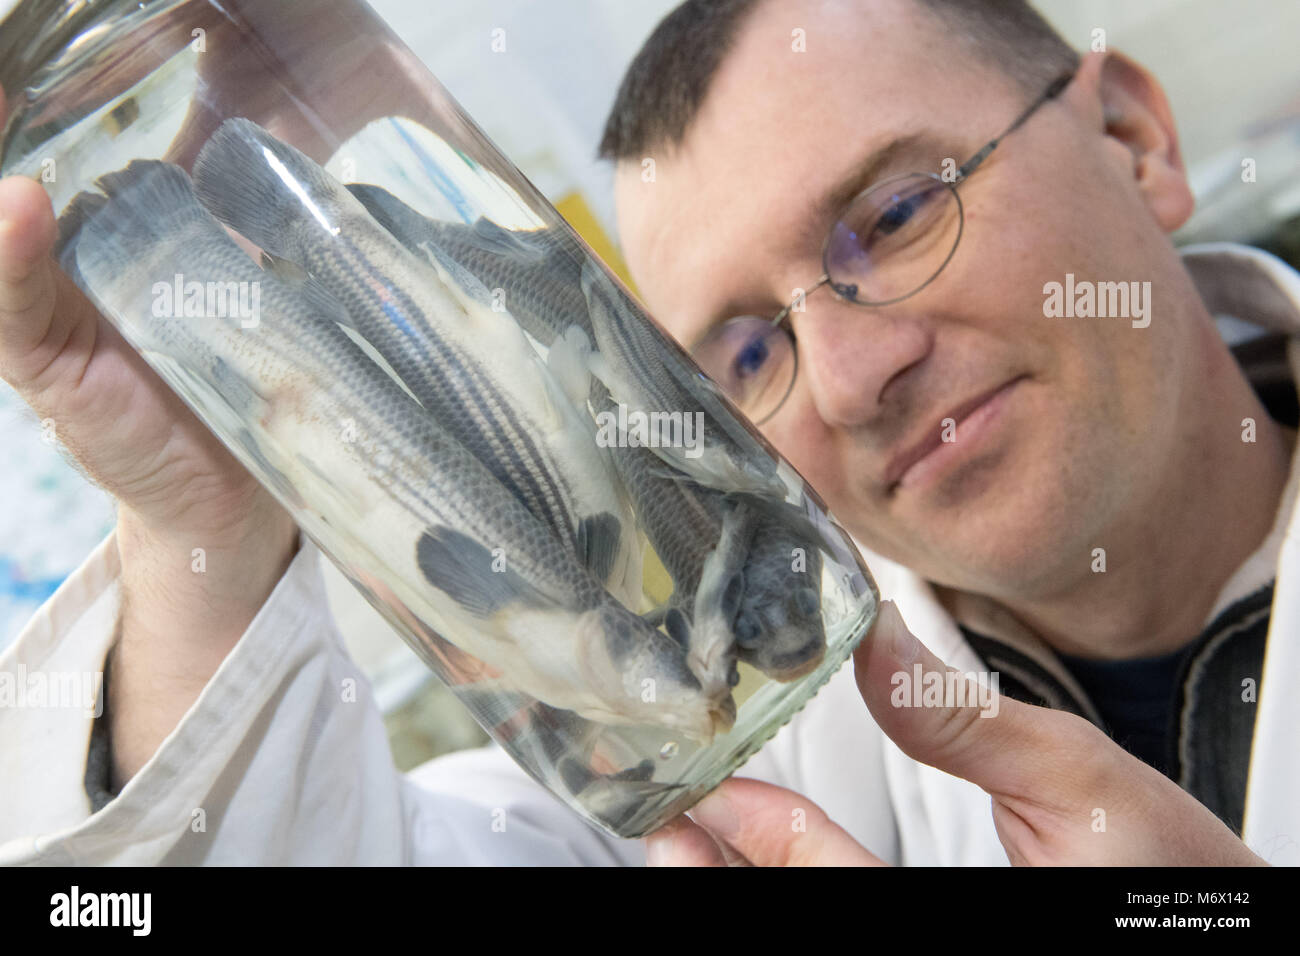 05 March 2018, Germany, Straslung: Fish researcher Timo Moritz shows four-eyed fishes, which belong to the species of toothcarps, at the Oceanographic Museum. The collection at Straslund Oceanographic Museum spans about 8000 fish specimen, which are preserved in alcohol. More than 2000 of the world-wide existing 30 000 fish species can be found in the collection. Photo: Stefan Sauer/dpa Stock Photo